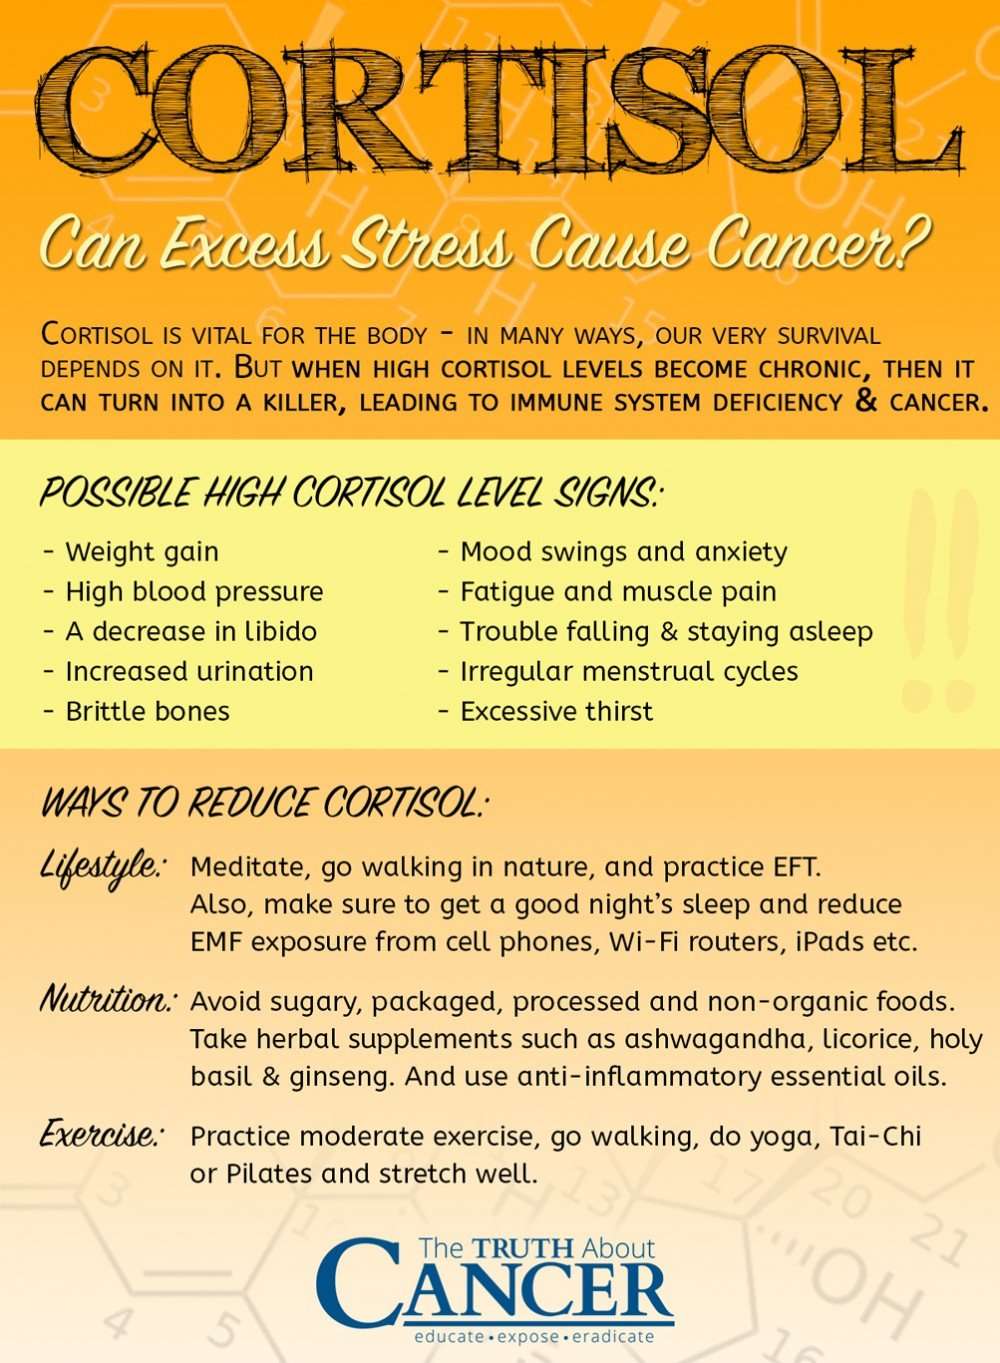 High Cortisol Levels and Breast Cancer: What